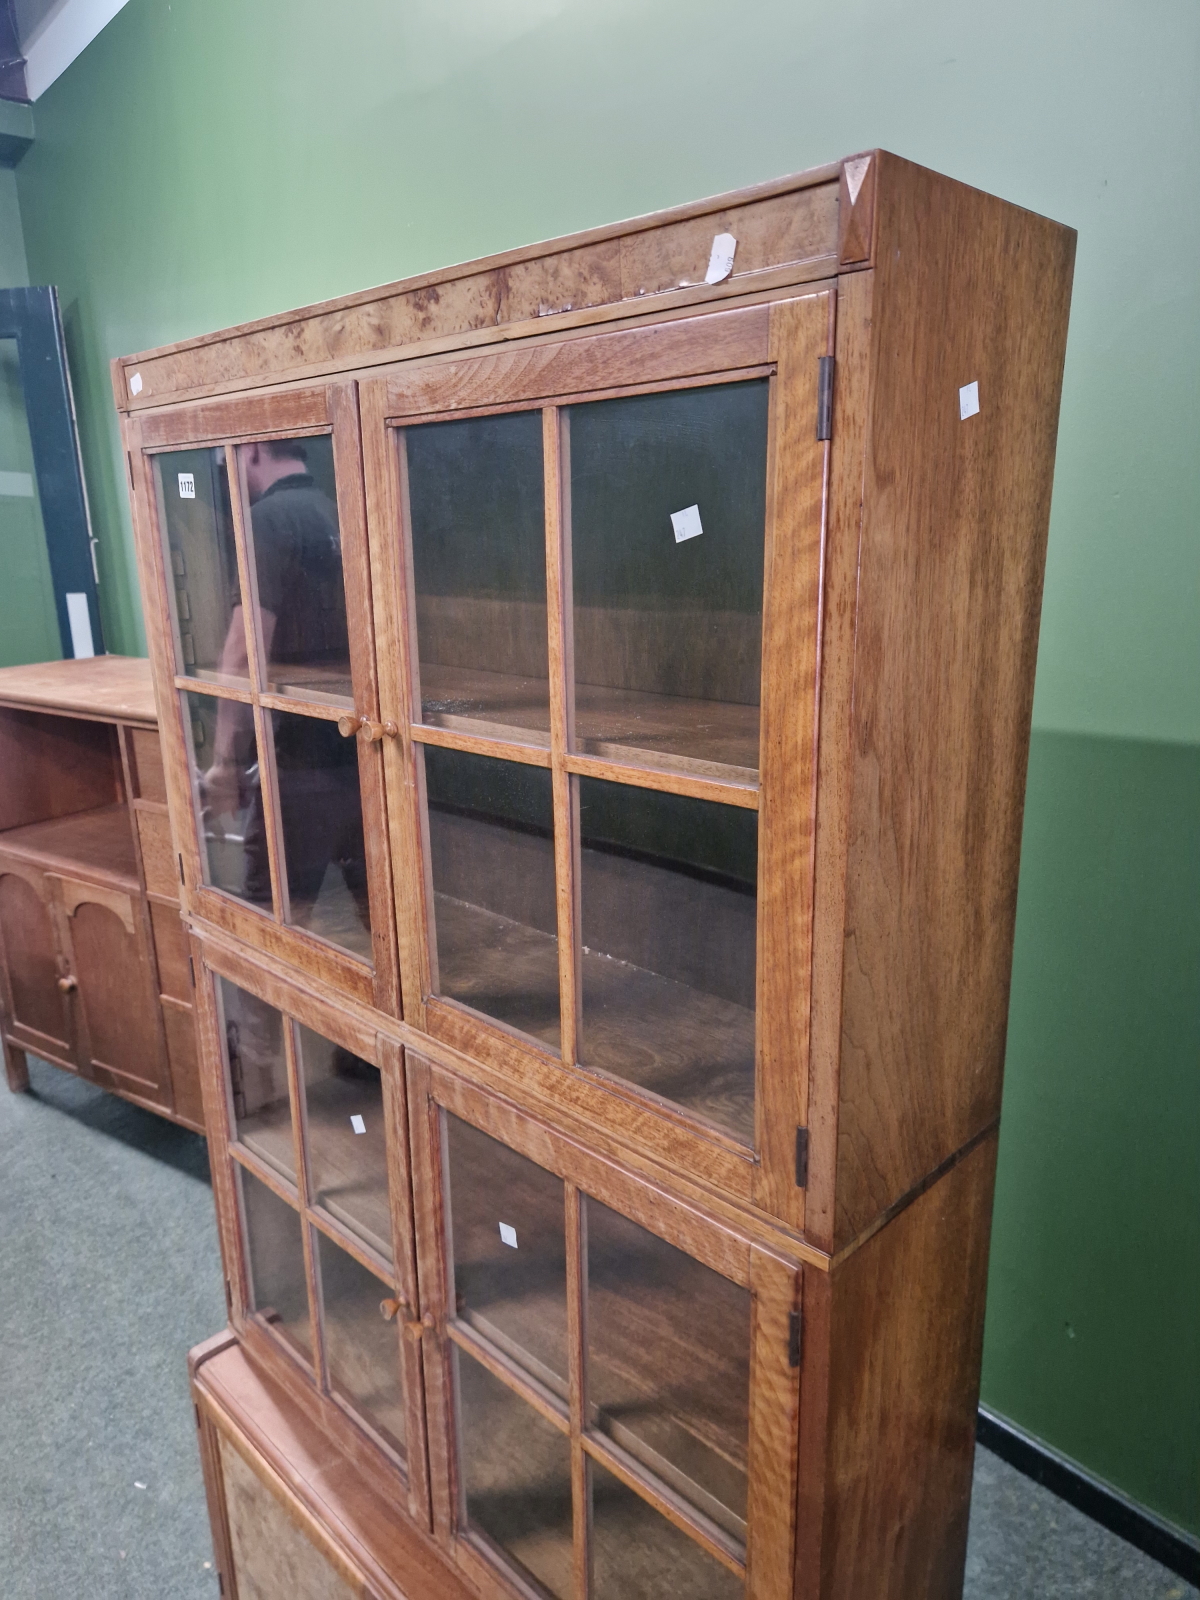 A VINTAGE MINTY TYPE MAHOGANY STACKING BOOKCASE. - Image 5 of 6